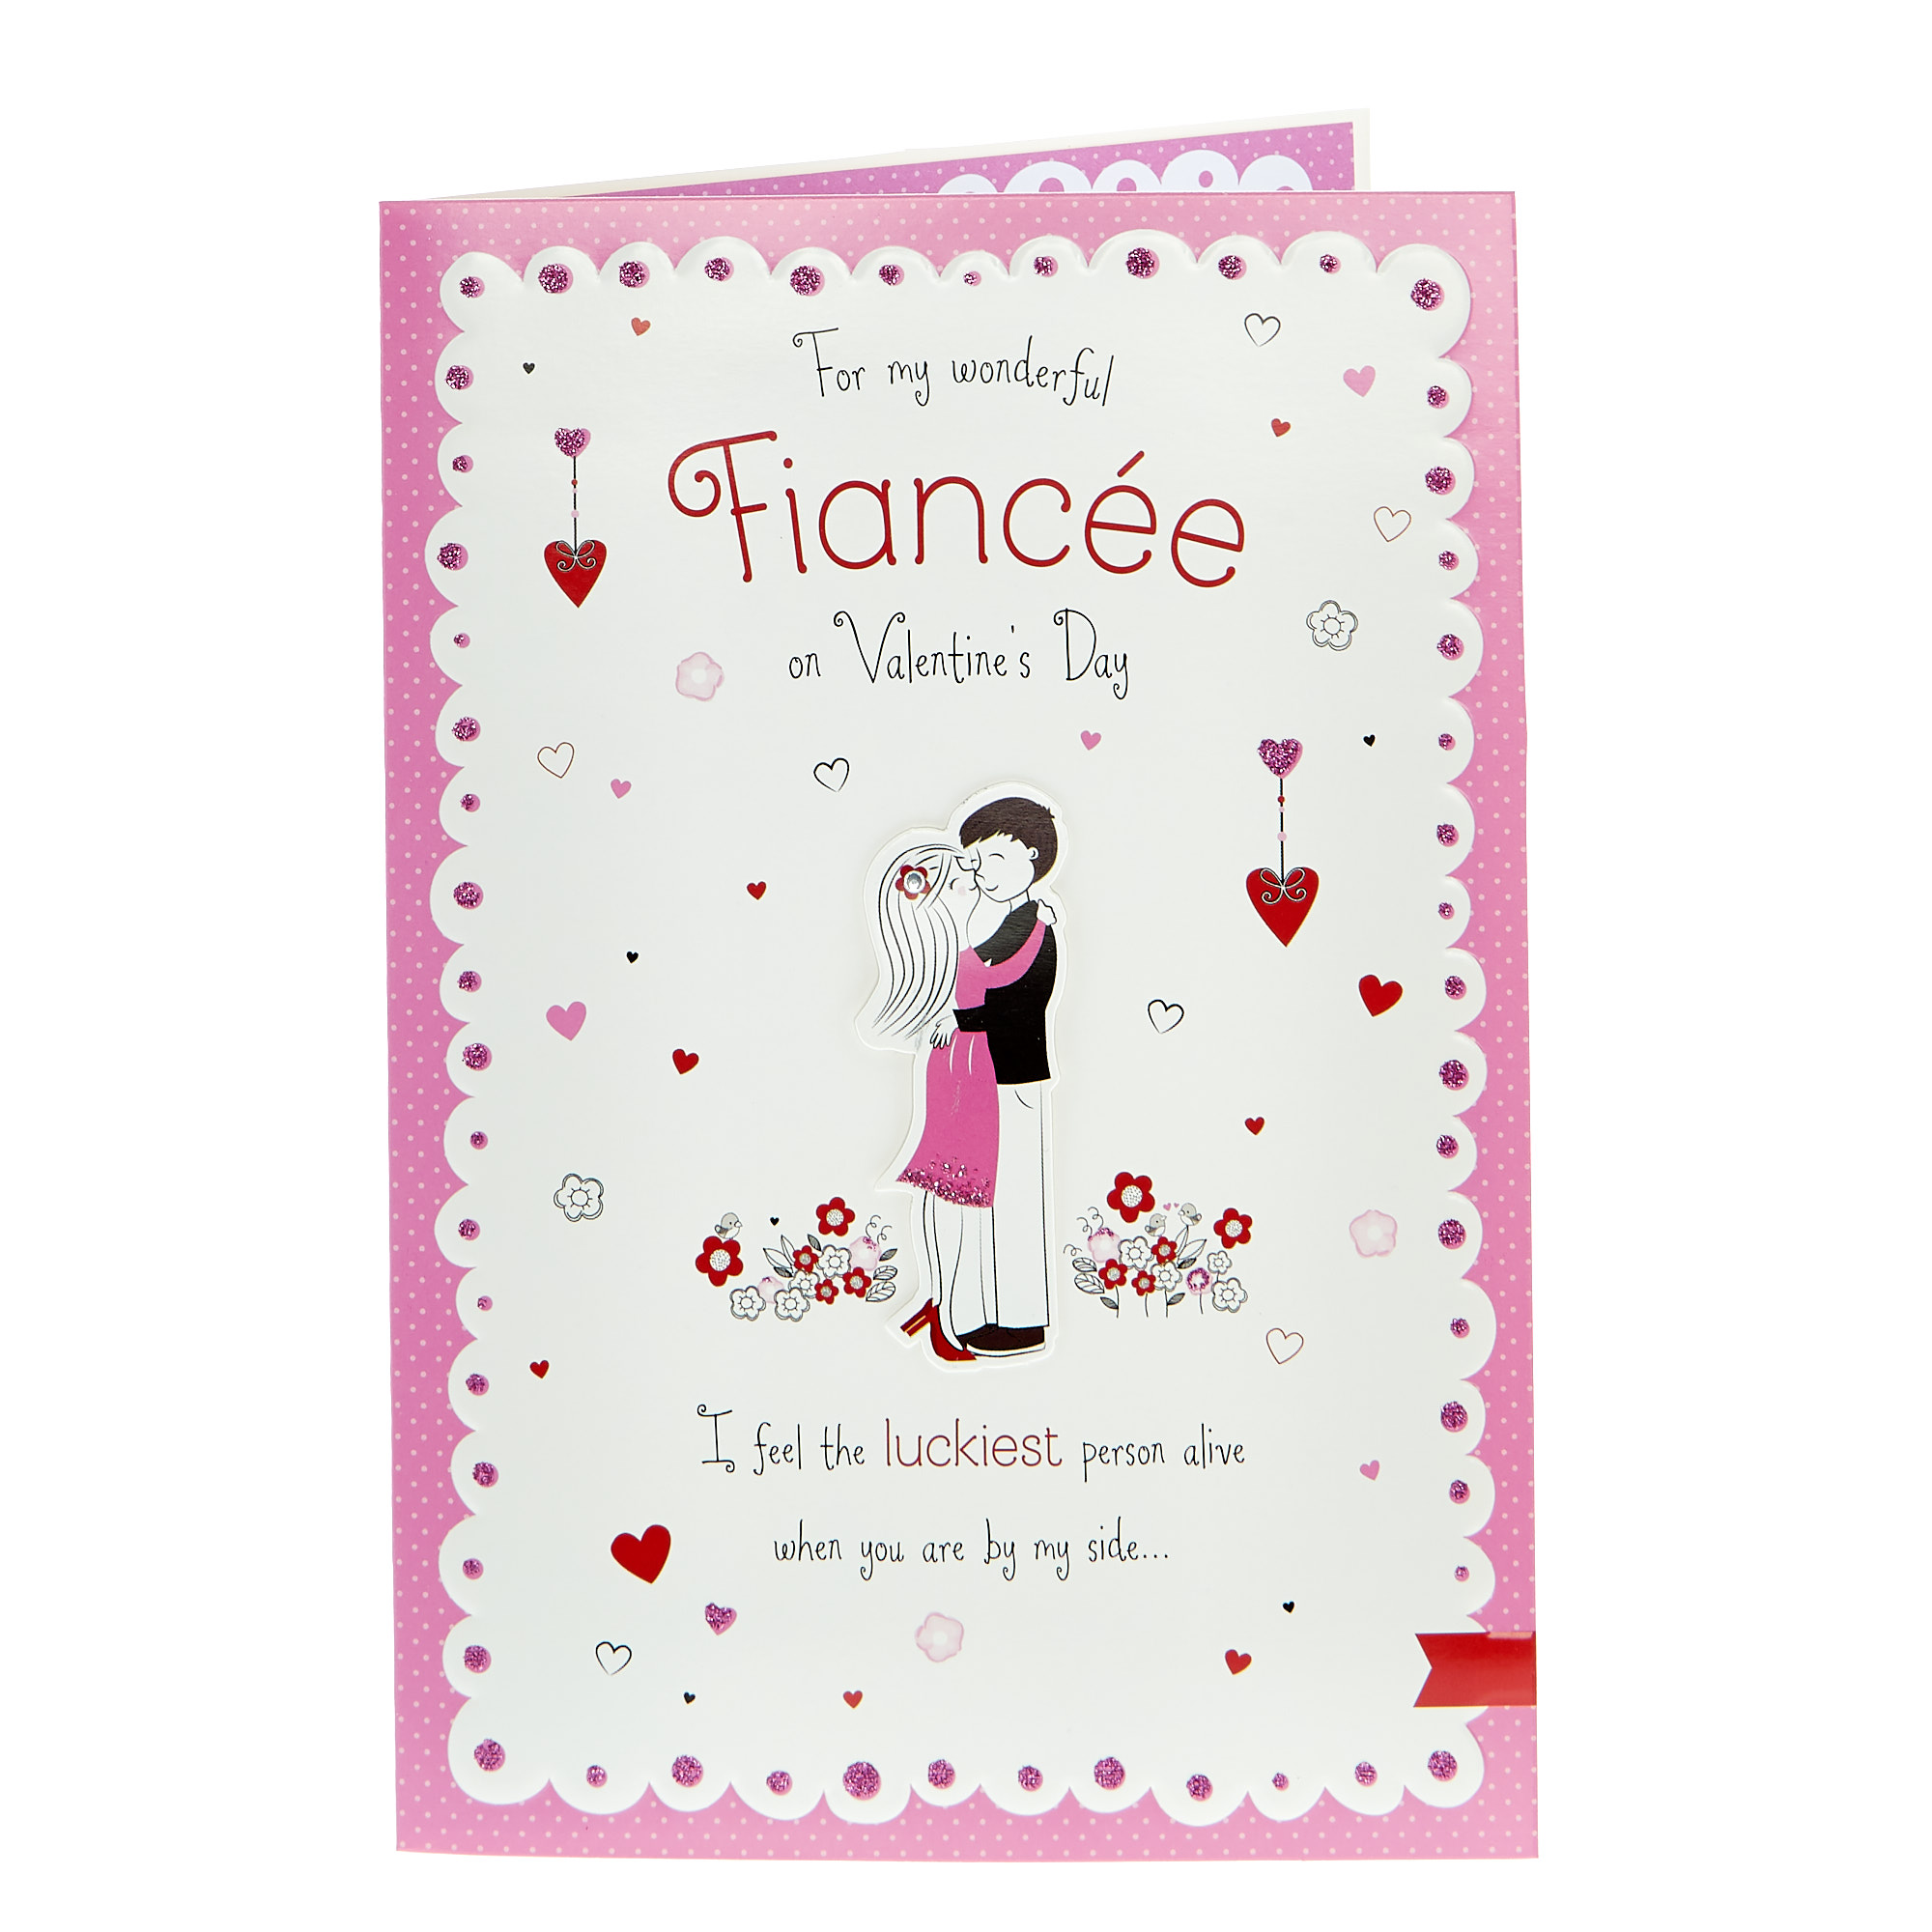 Valentine's Day Card - Fiancee Luckiest Personal Alive